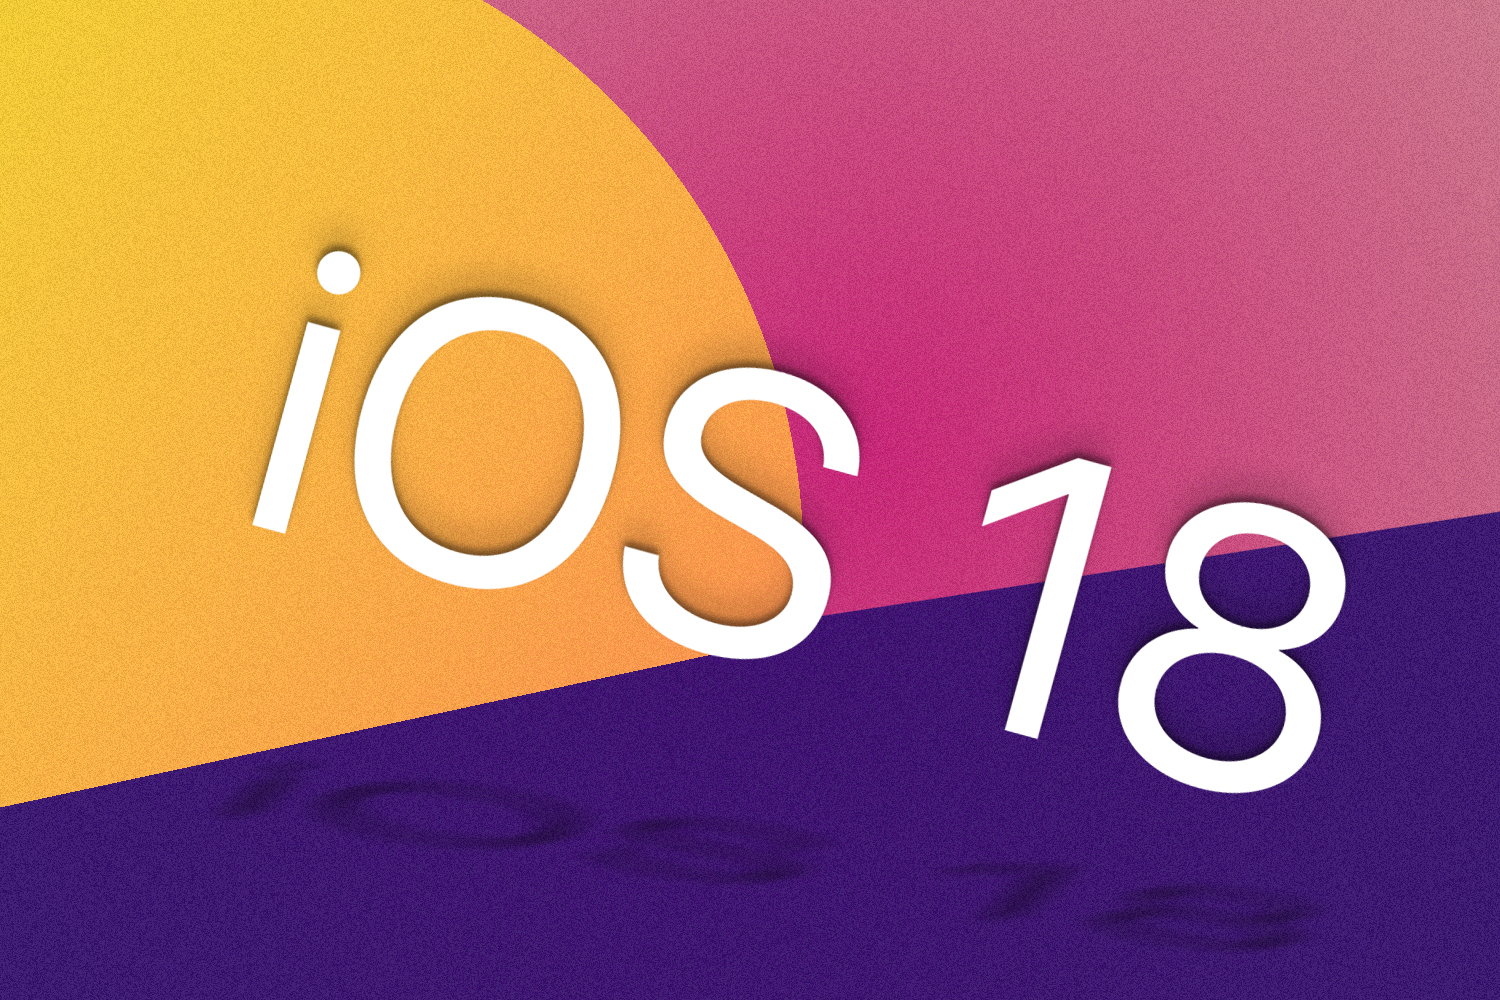 Apple iOS 18 free upgrade preview release date, features, and